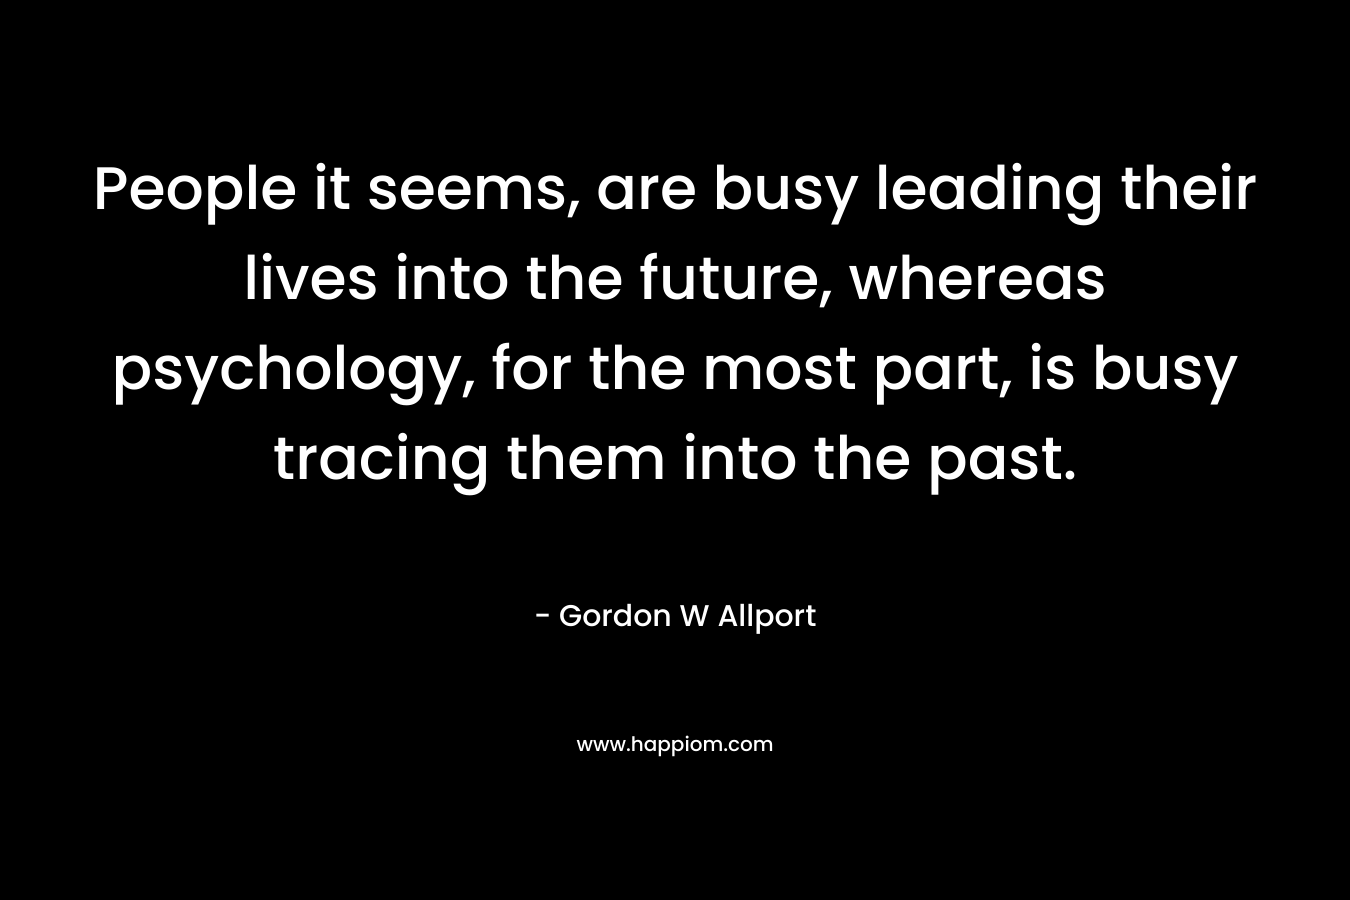 People it seems, are busy leading their lives into the future, whereas psychology, for the most part, is busy tracing them into the past.